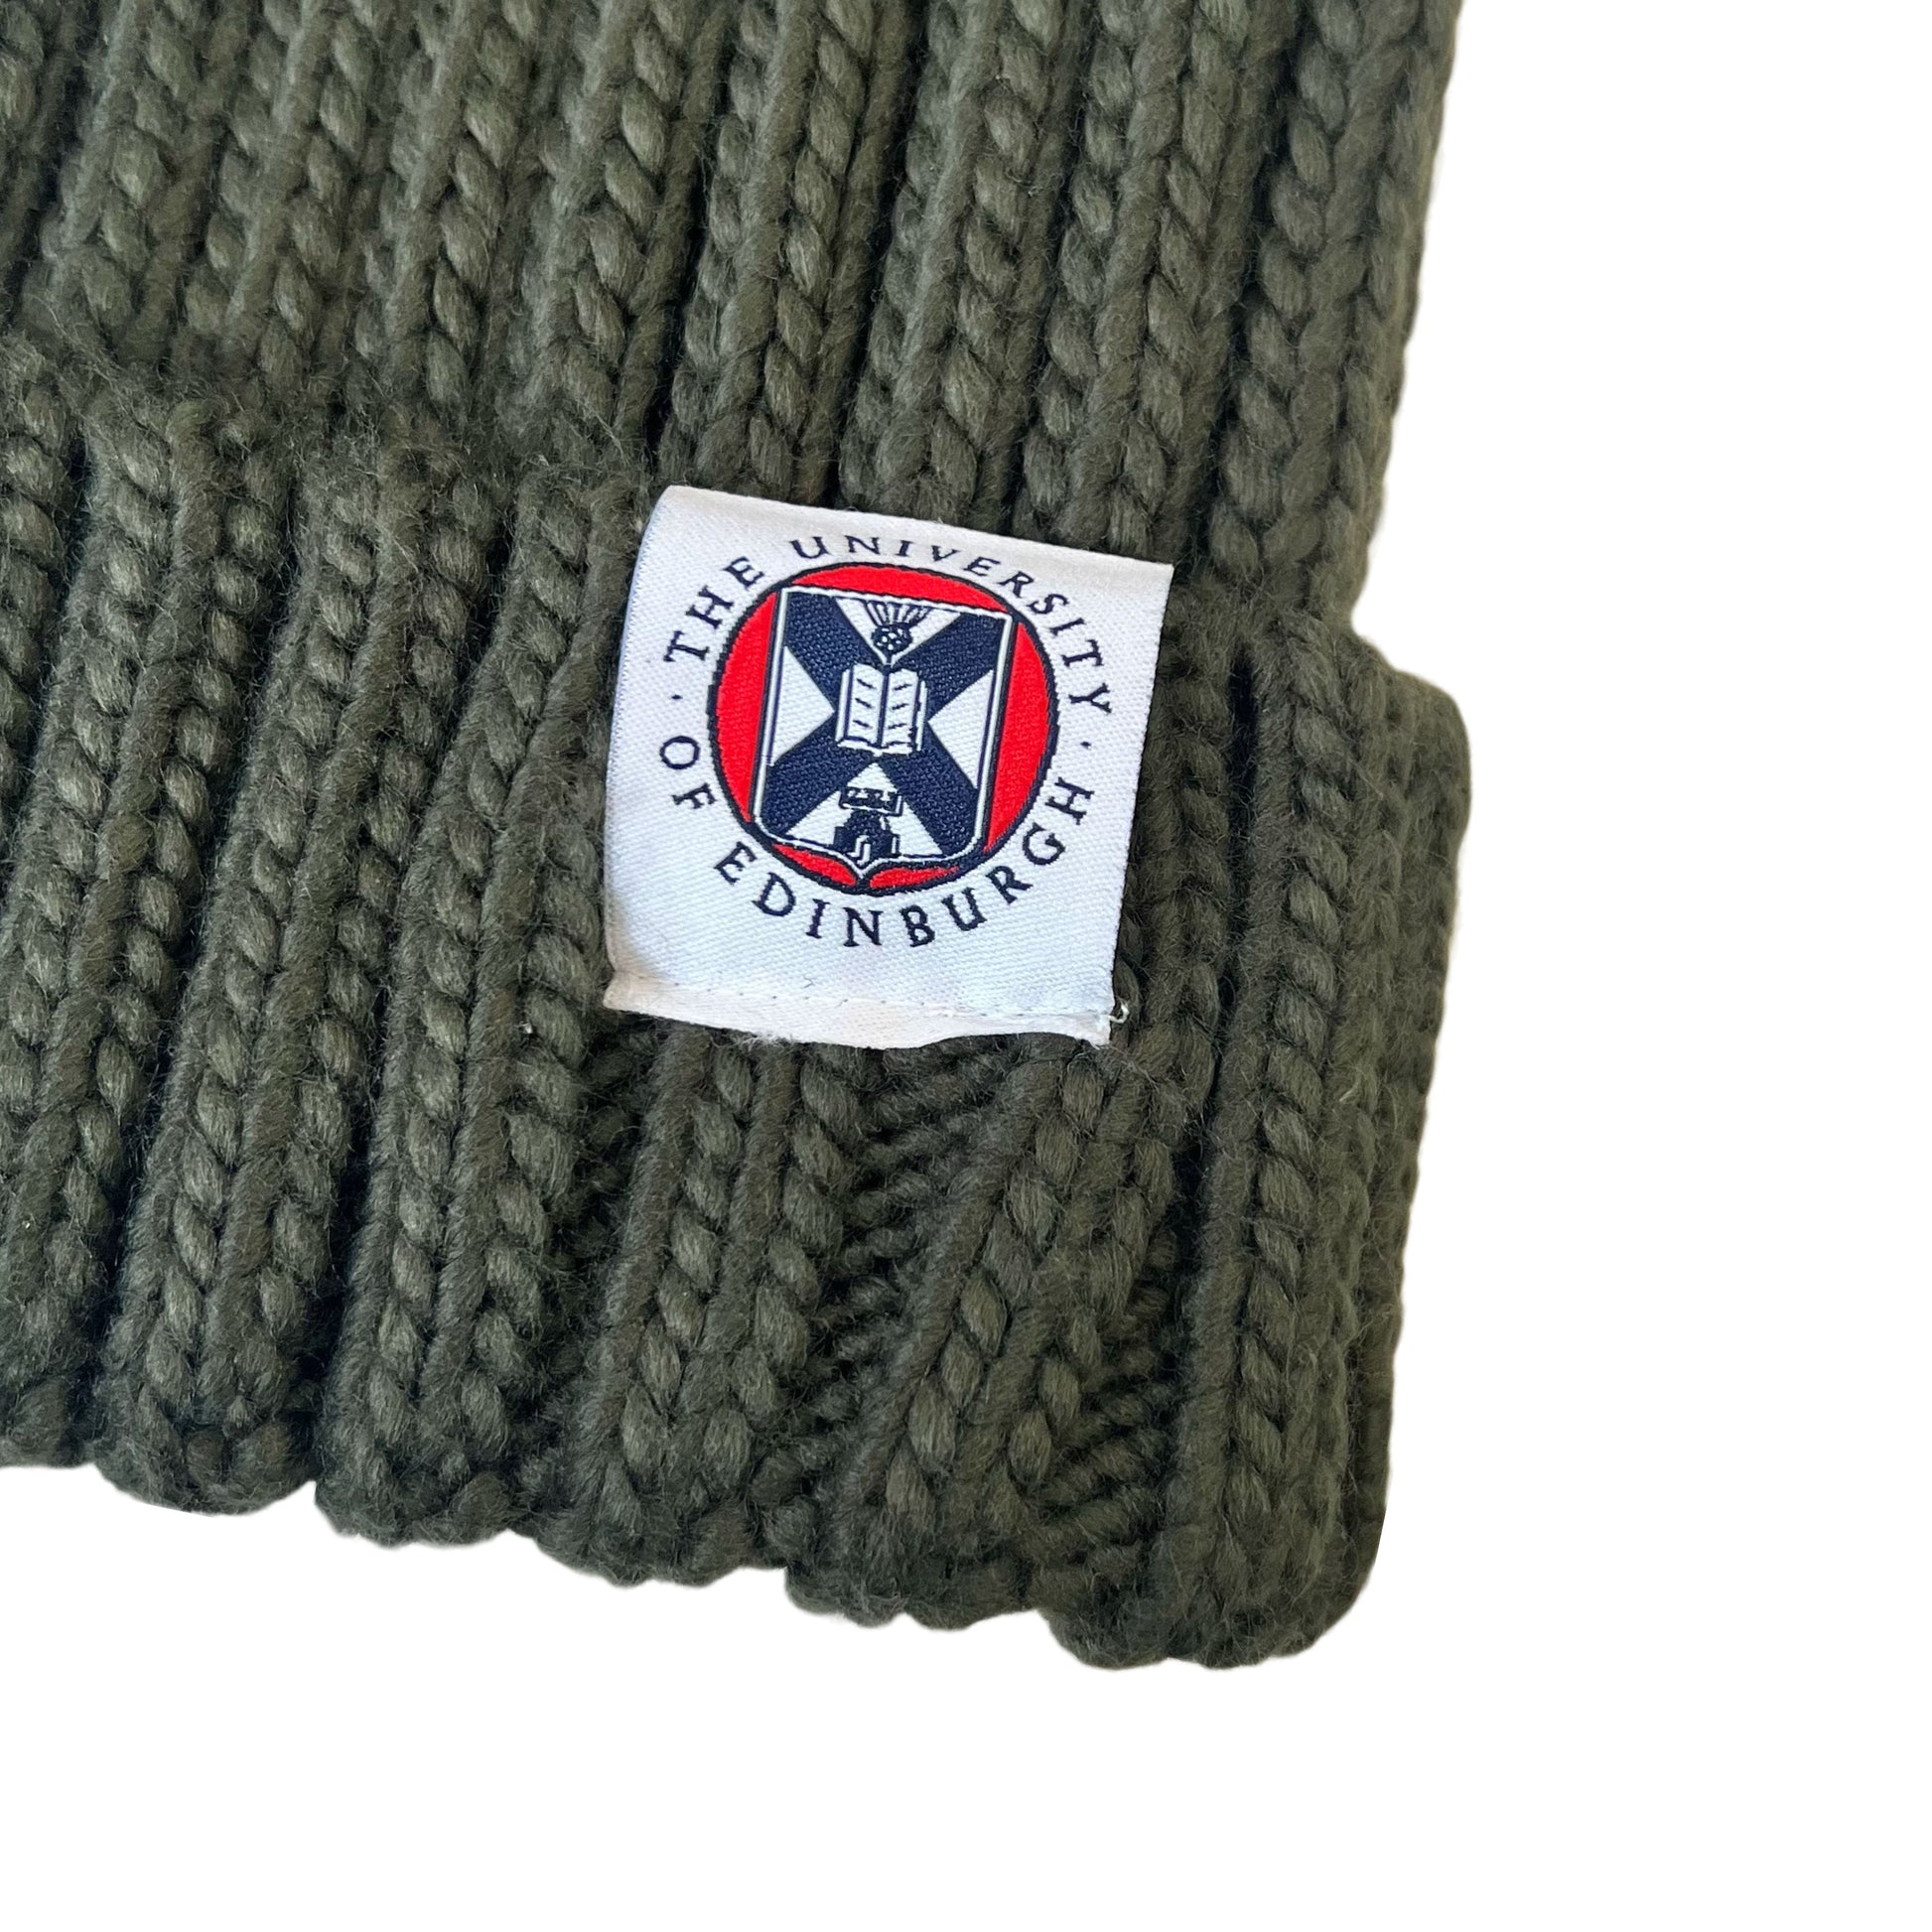 close up of Olive Green knit beanie with faux fur pom pom and woven label featuring university crest